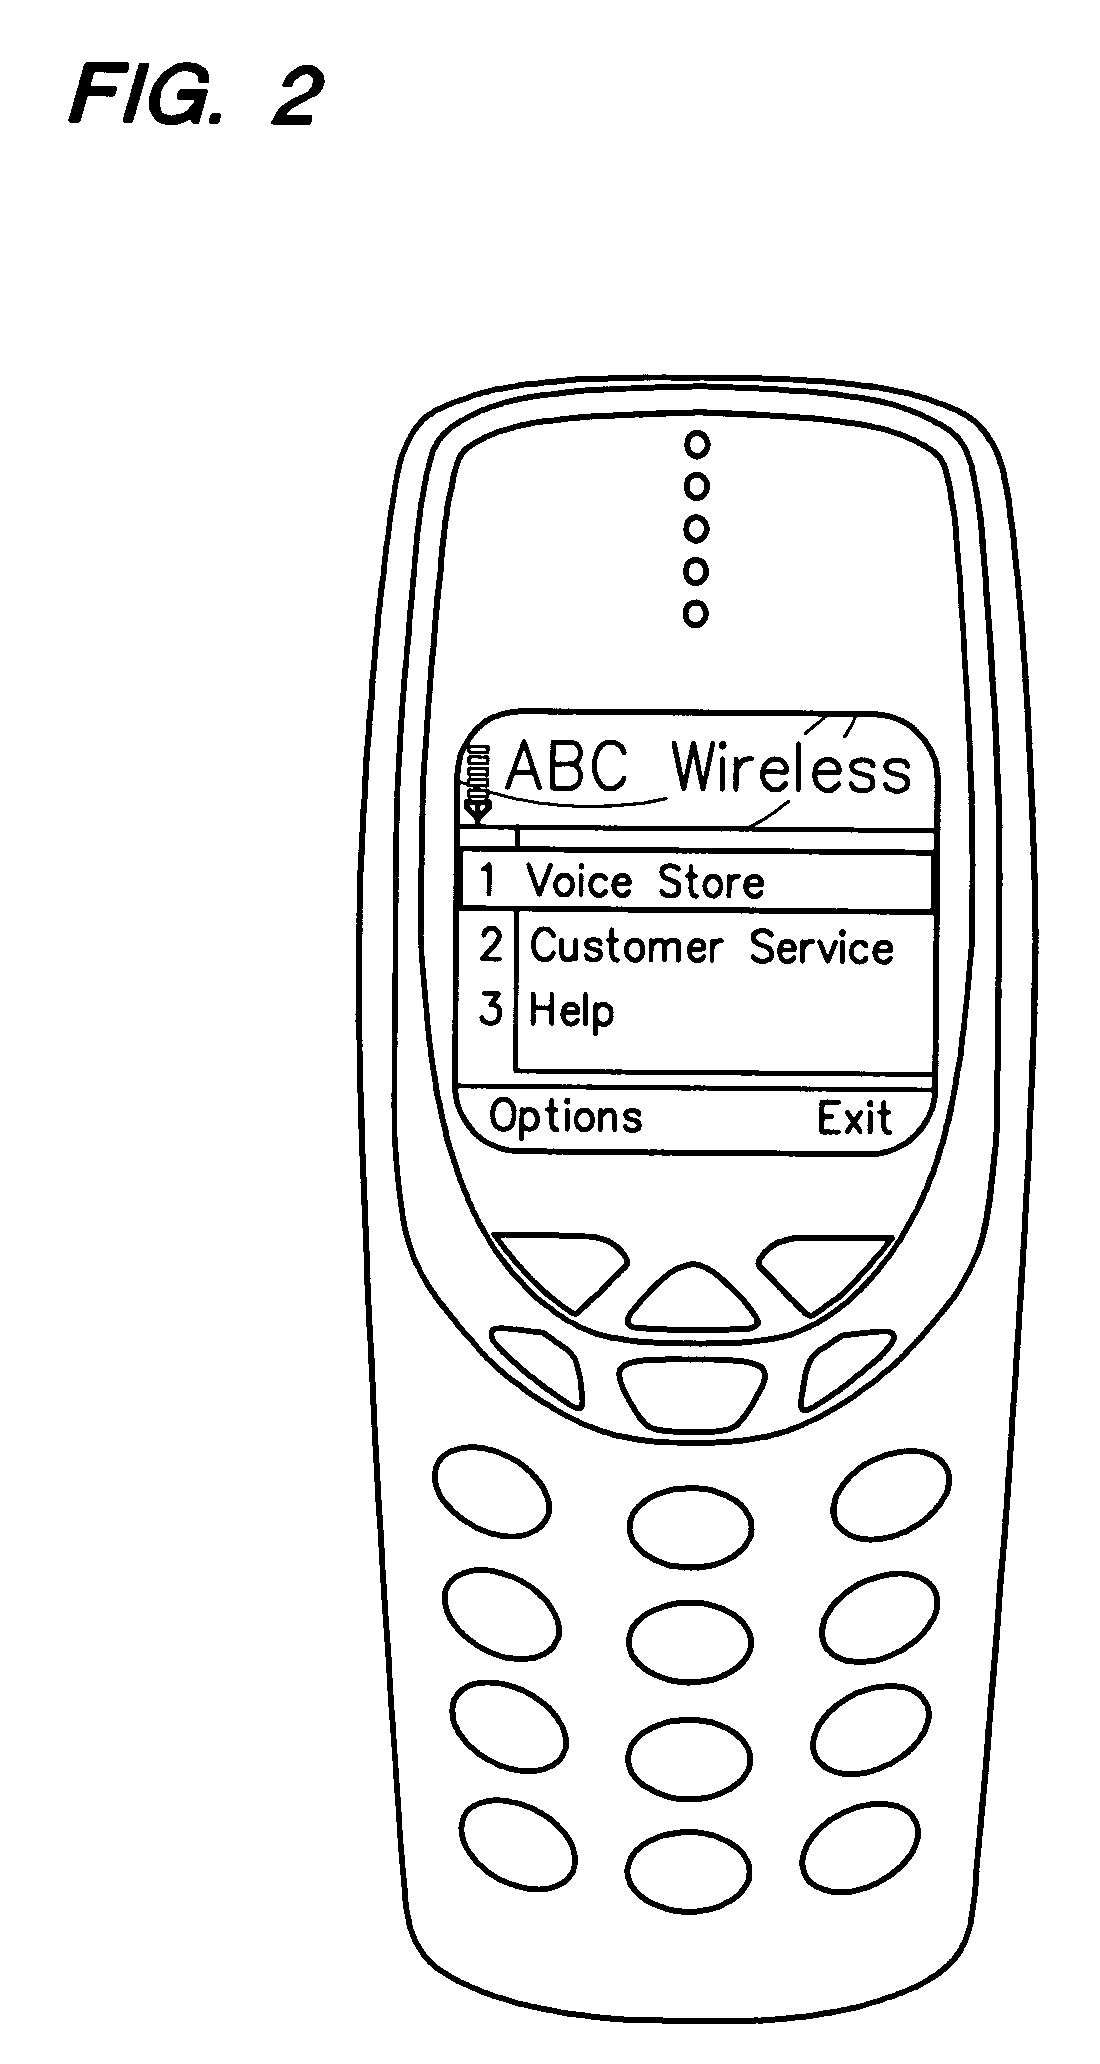 Software program and method for reducing misdirected calls to a select destination